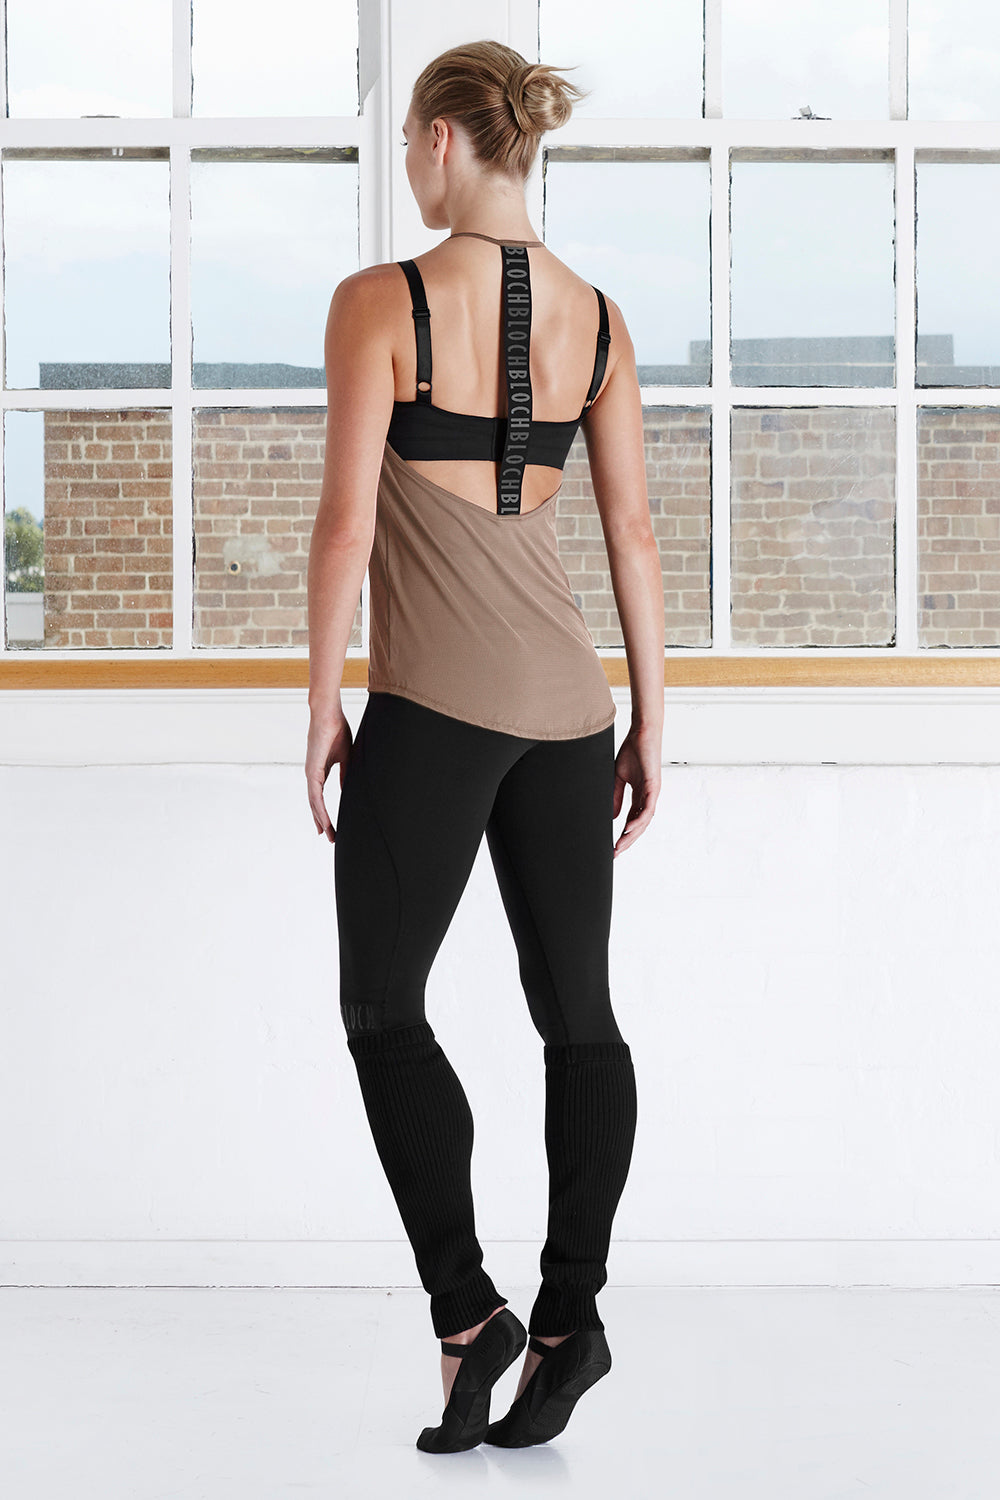 A female dancer in the studio wearing BLOCH leggings and a T back top